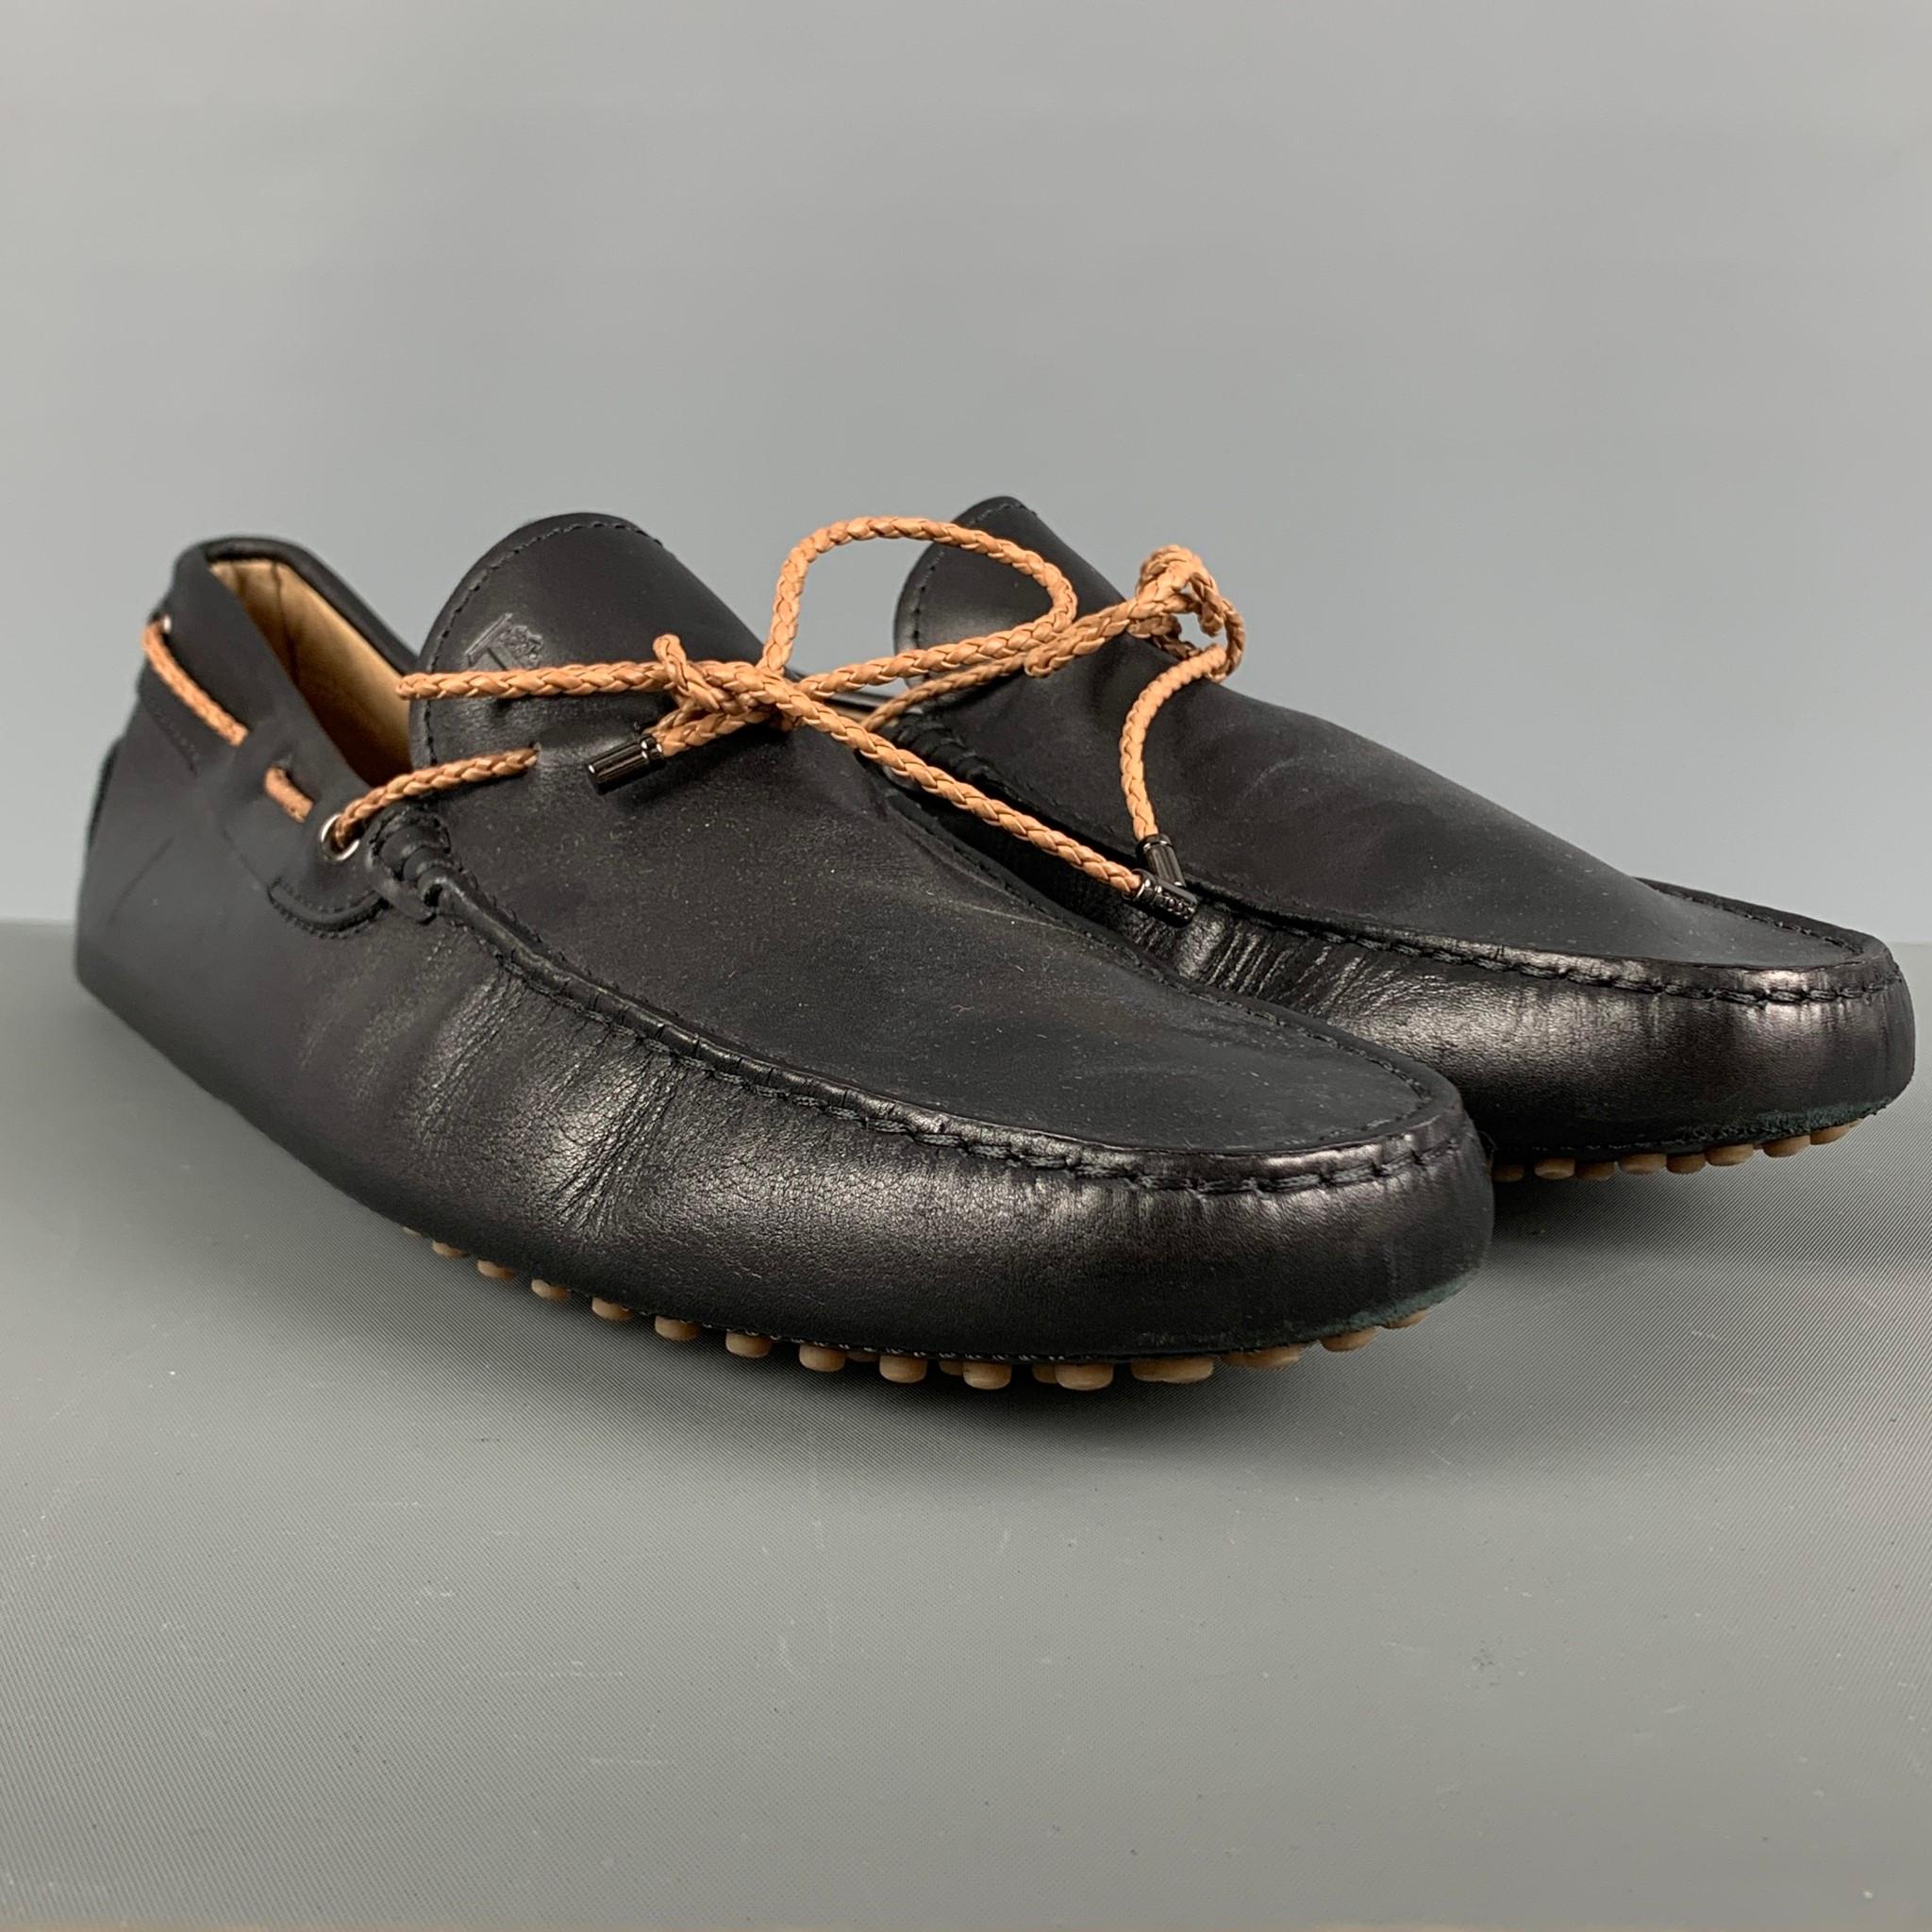 TOD'S loafers comes in a black leather featuring a brown leather ties, driving style, rubber dotted sole, and slip on. Made in Italy.

Excellent Pre-Owned Condition.
Marked: 10

Outsole: 12 in. x 4.25 in.  

 

 

SKU: 125043
Category: Loafers

More